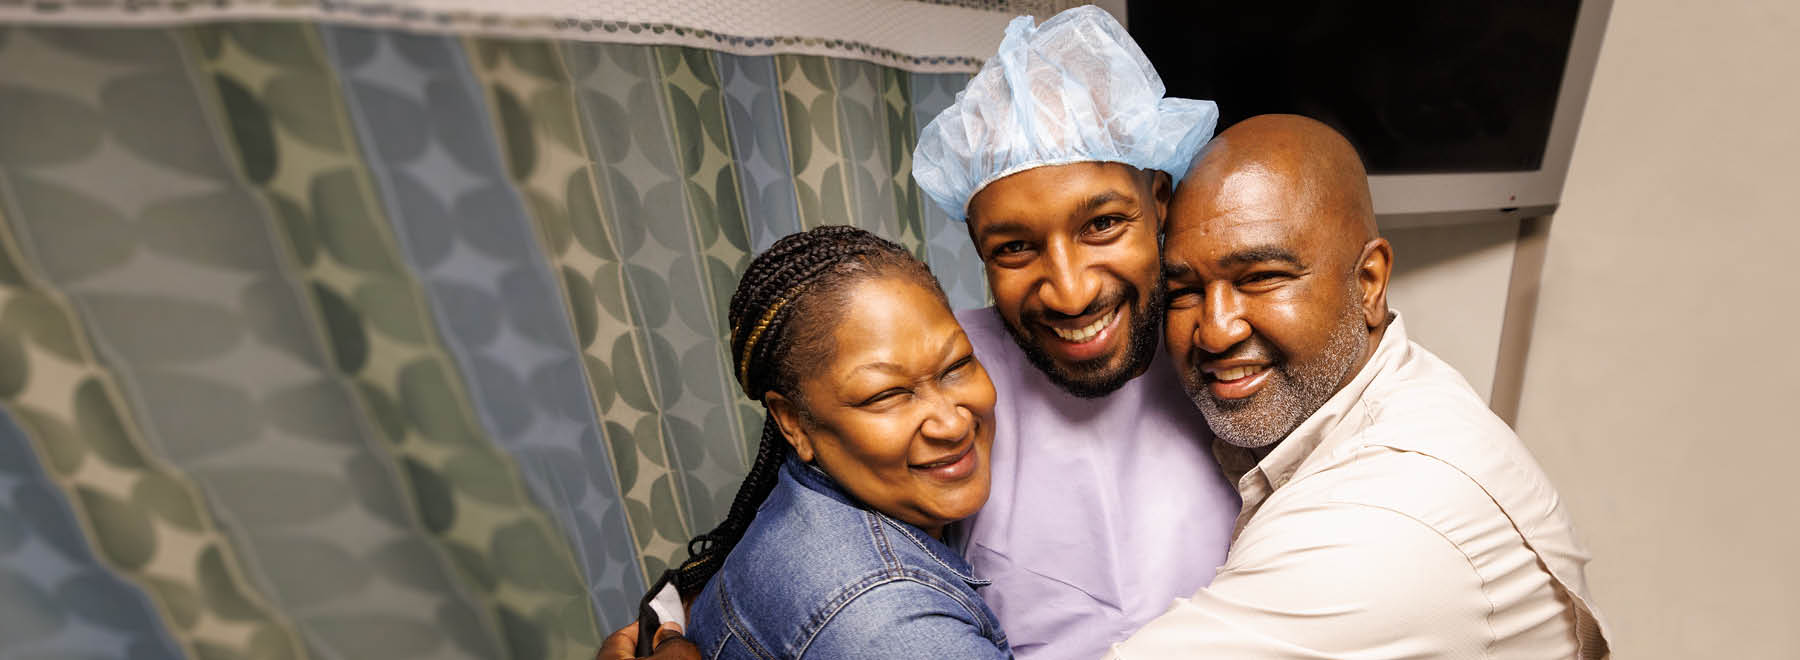 Family hugs patient while smiling.